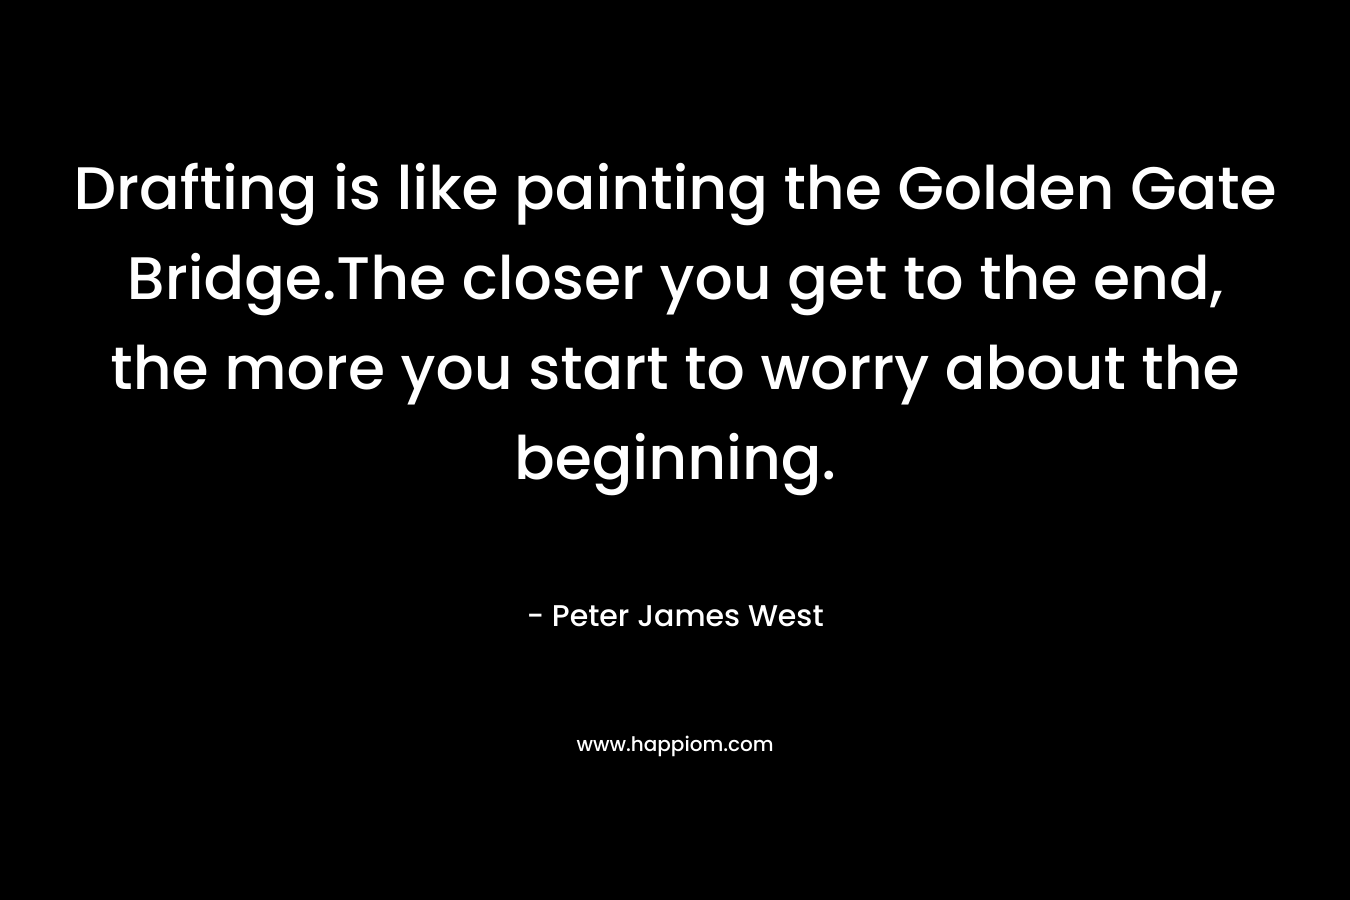 Drafting is like painting the Golden Gate Bridge.The closer you get to the end, the more you start to worry about the beginning. – Peter James West